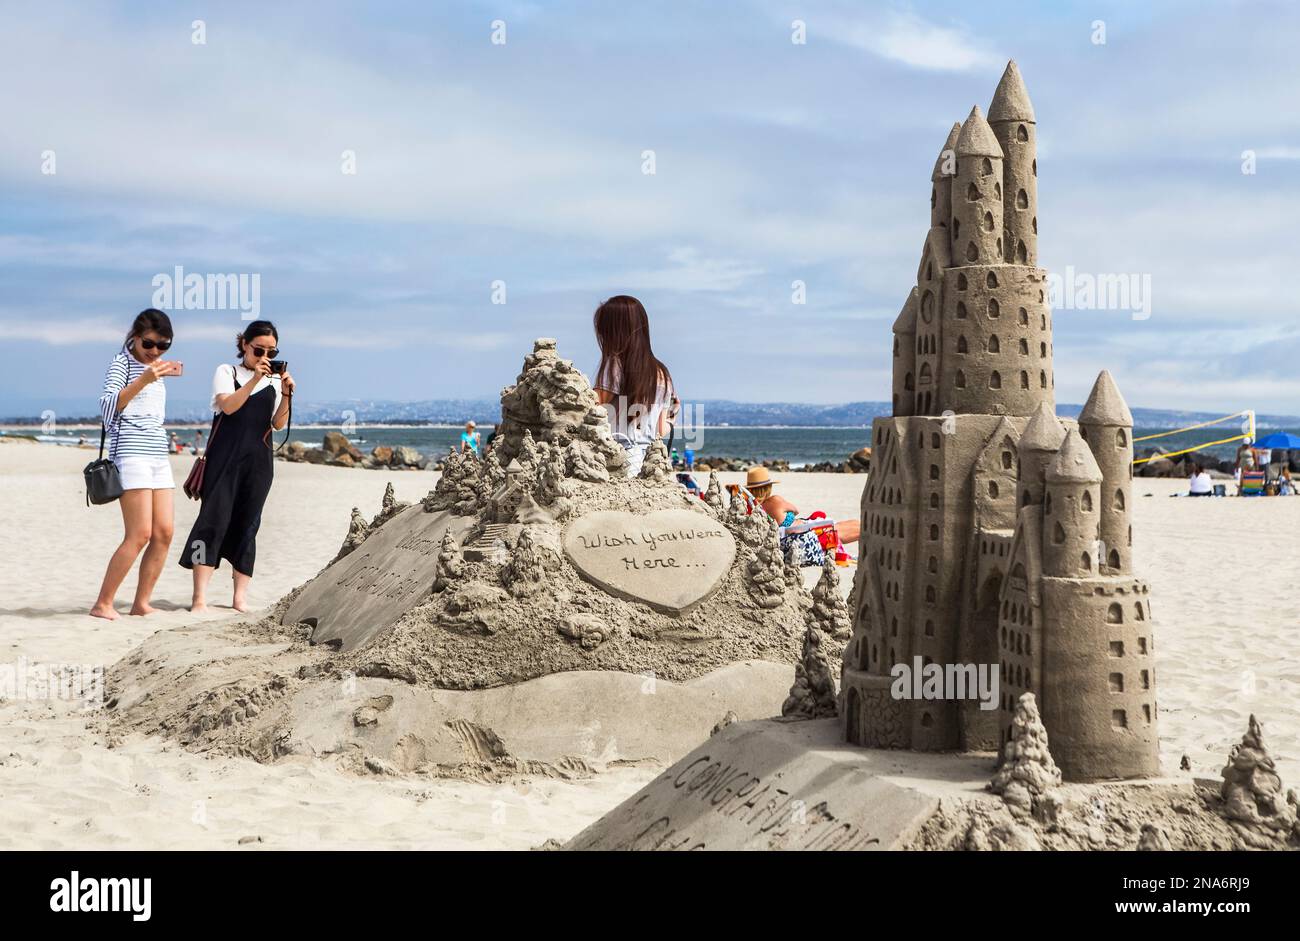 Two women taking a photograph of another woman standing next to a sandcastle creation on Coronado Beach Stock Photo